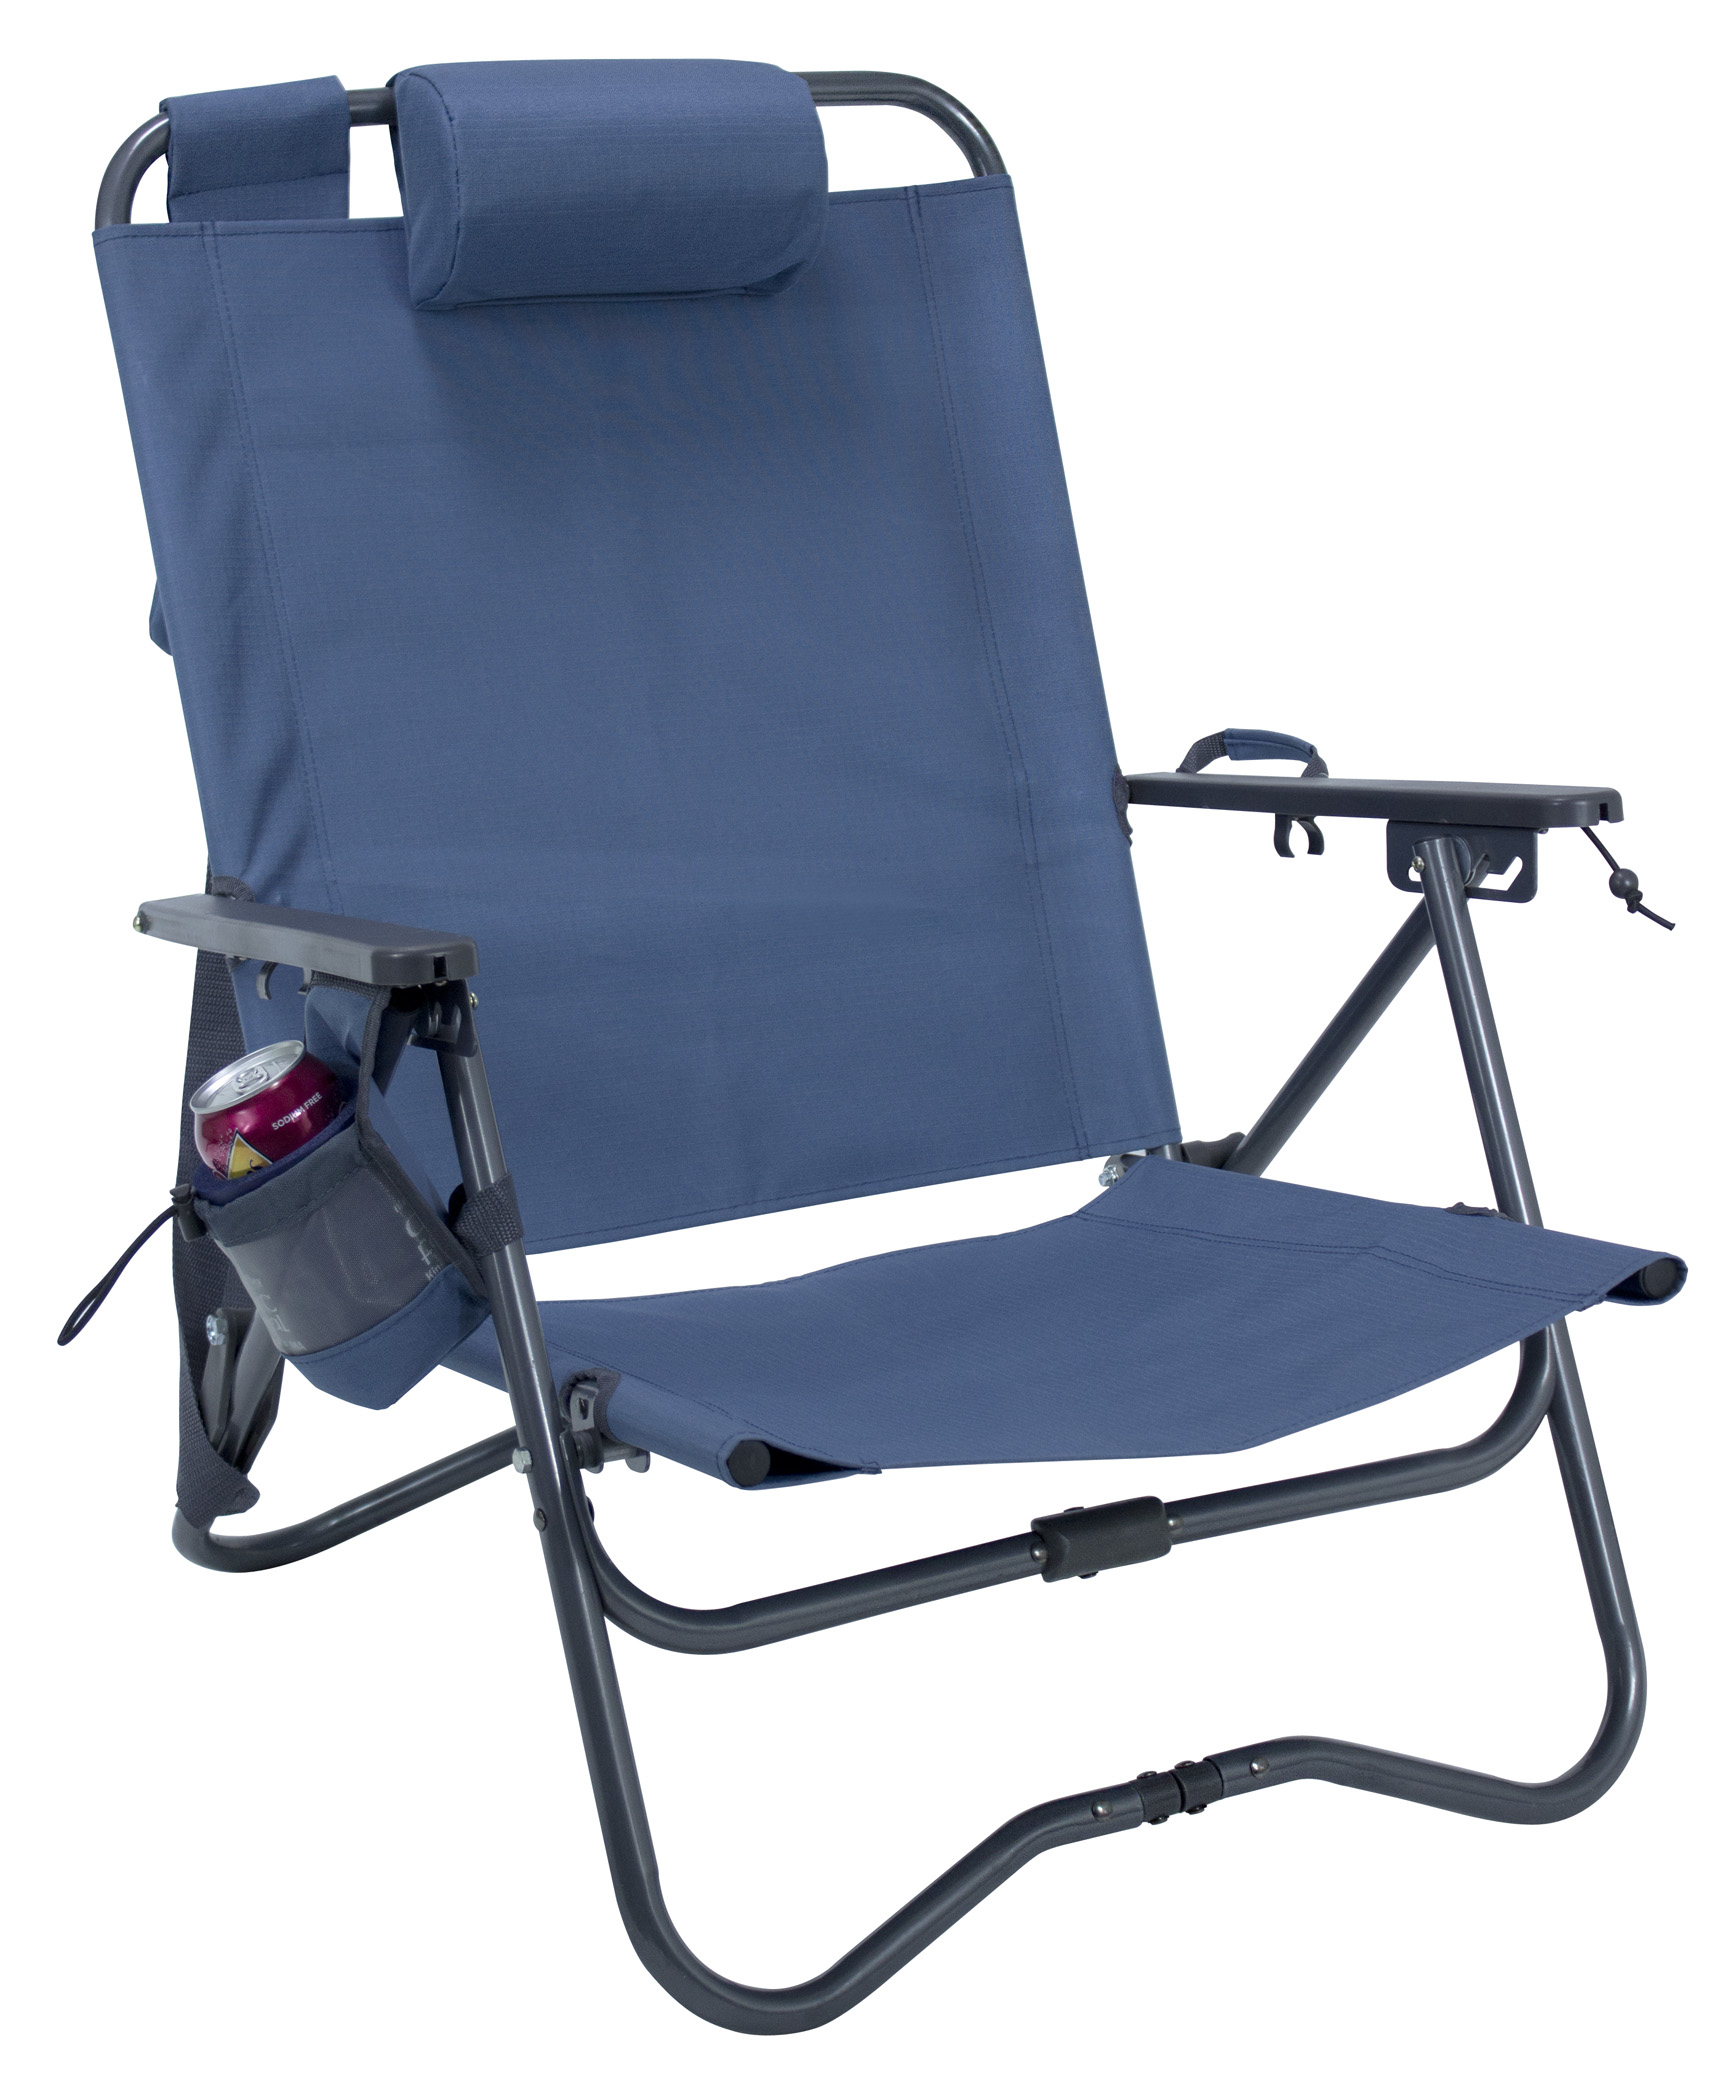 folding camping chairs bi-fold camp chair by gci outdoor SOHFEQG